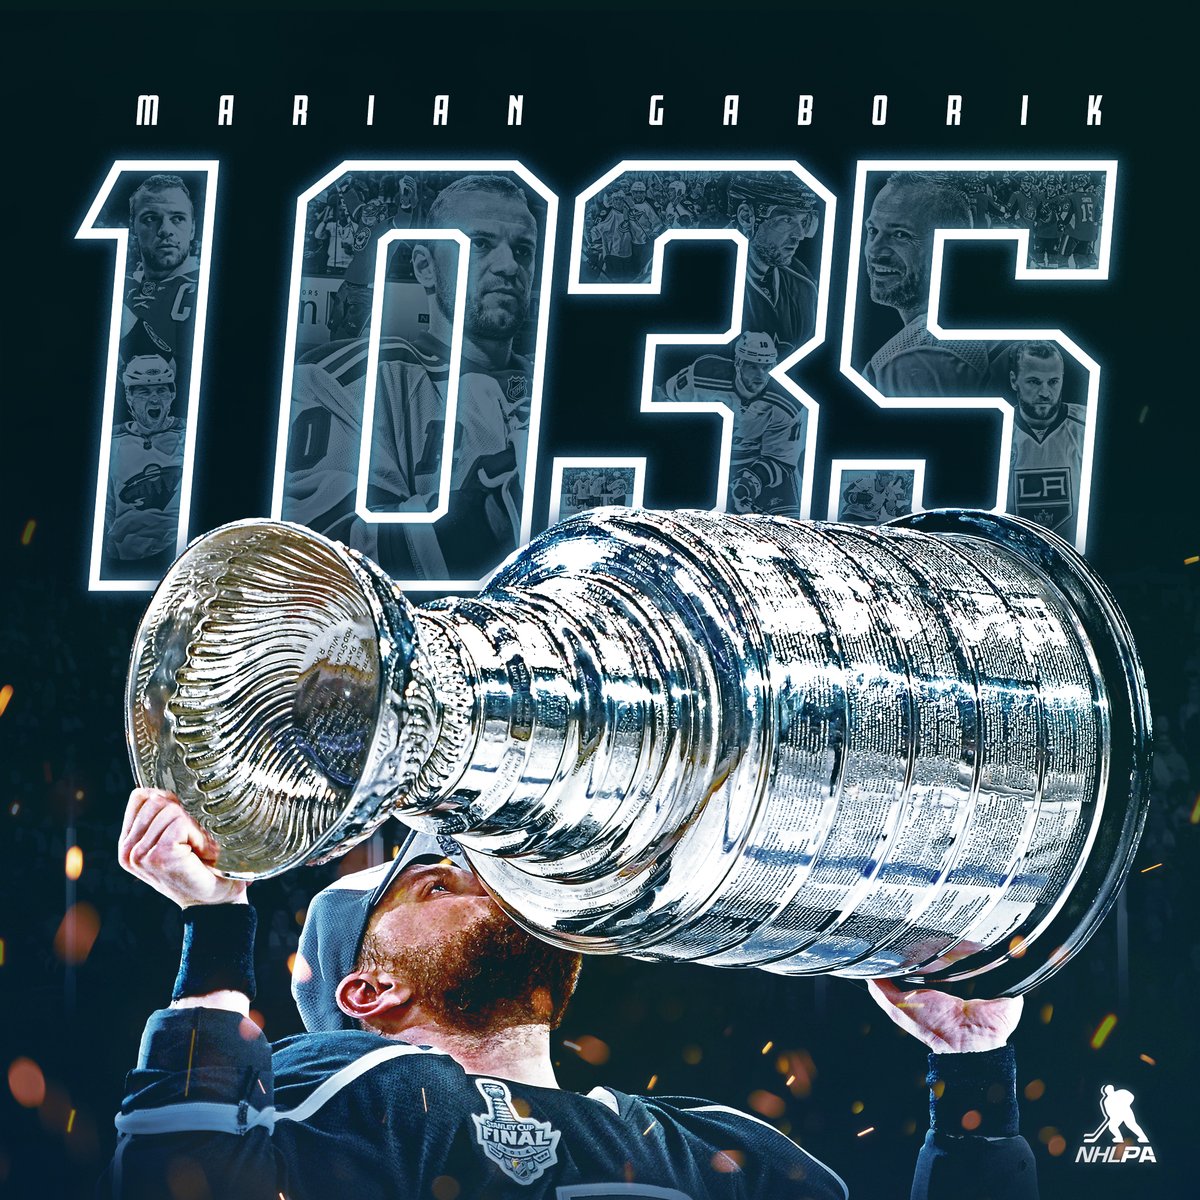 After 1,035 games in 17 NHL seasons, which included capturing a #StanleyCup championship along with scoring 815 regular-season points, @MGaborik12 is officially hanging up the skates. More on the highest drafted Slovak player in NHL history: ply.rs/ca6d5e9c736